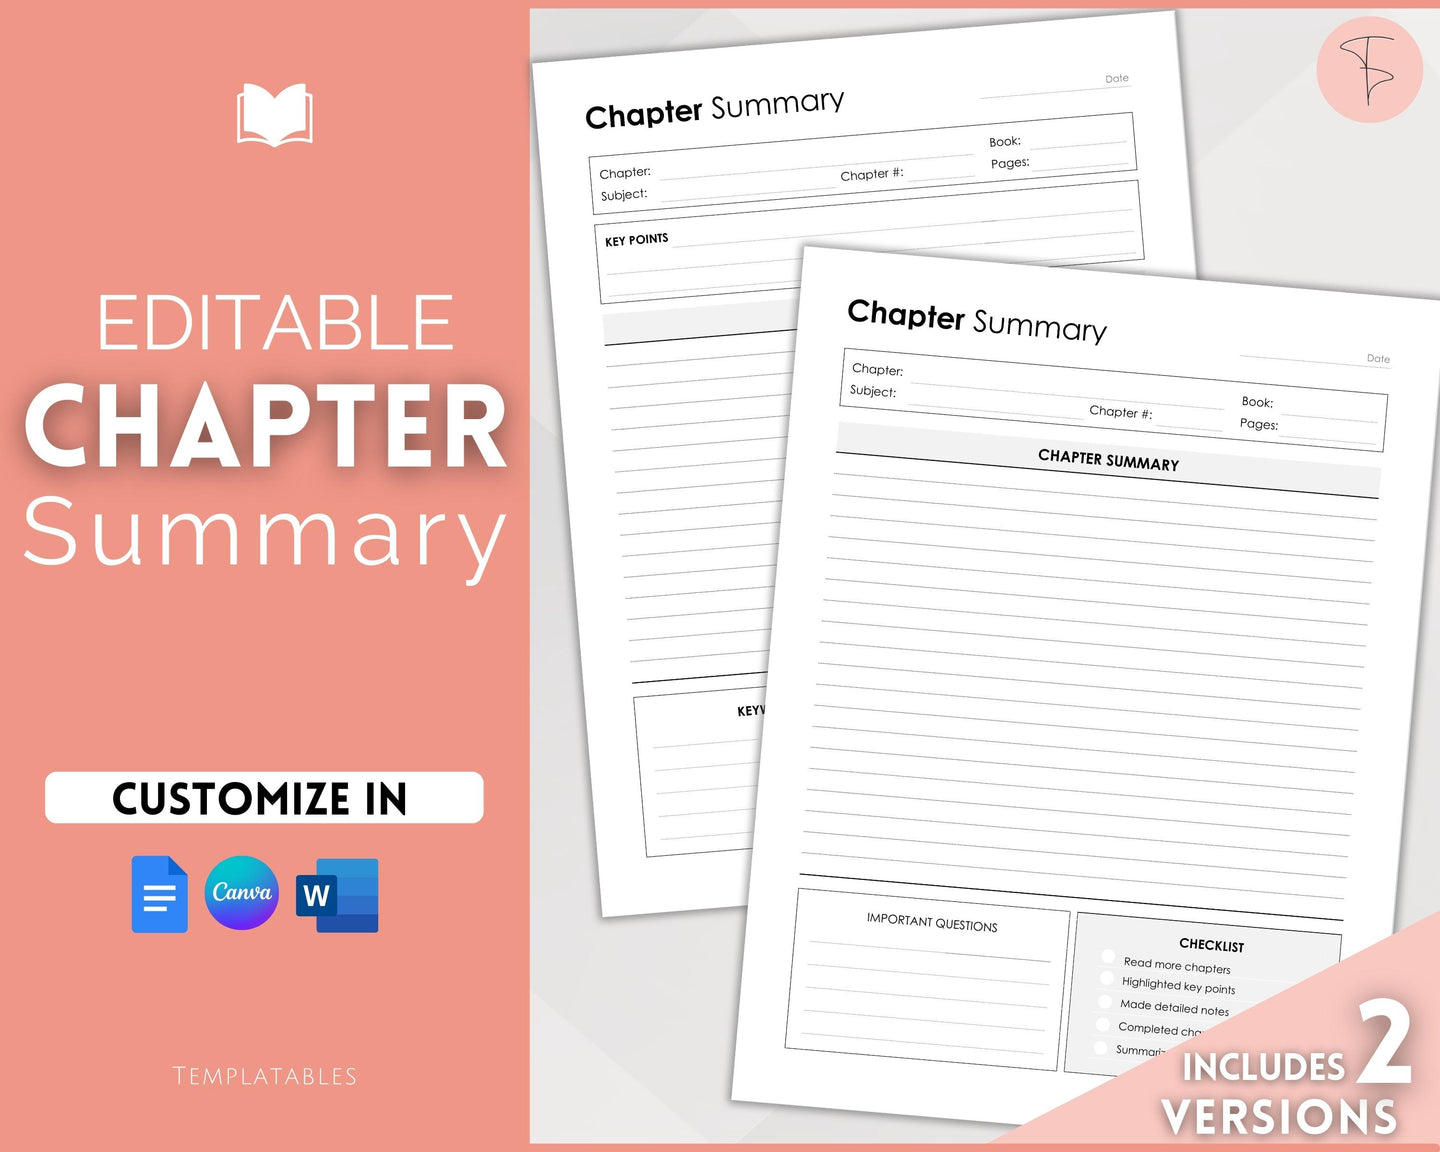 Chapter Summary Template | EDITABLE Essay Study Guide & Textbook Outline Review for Students | Minimalist